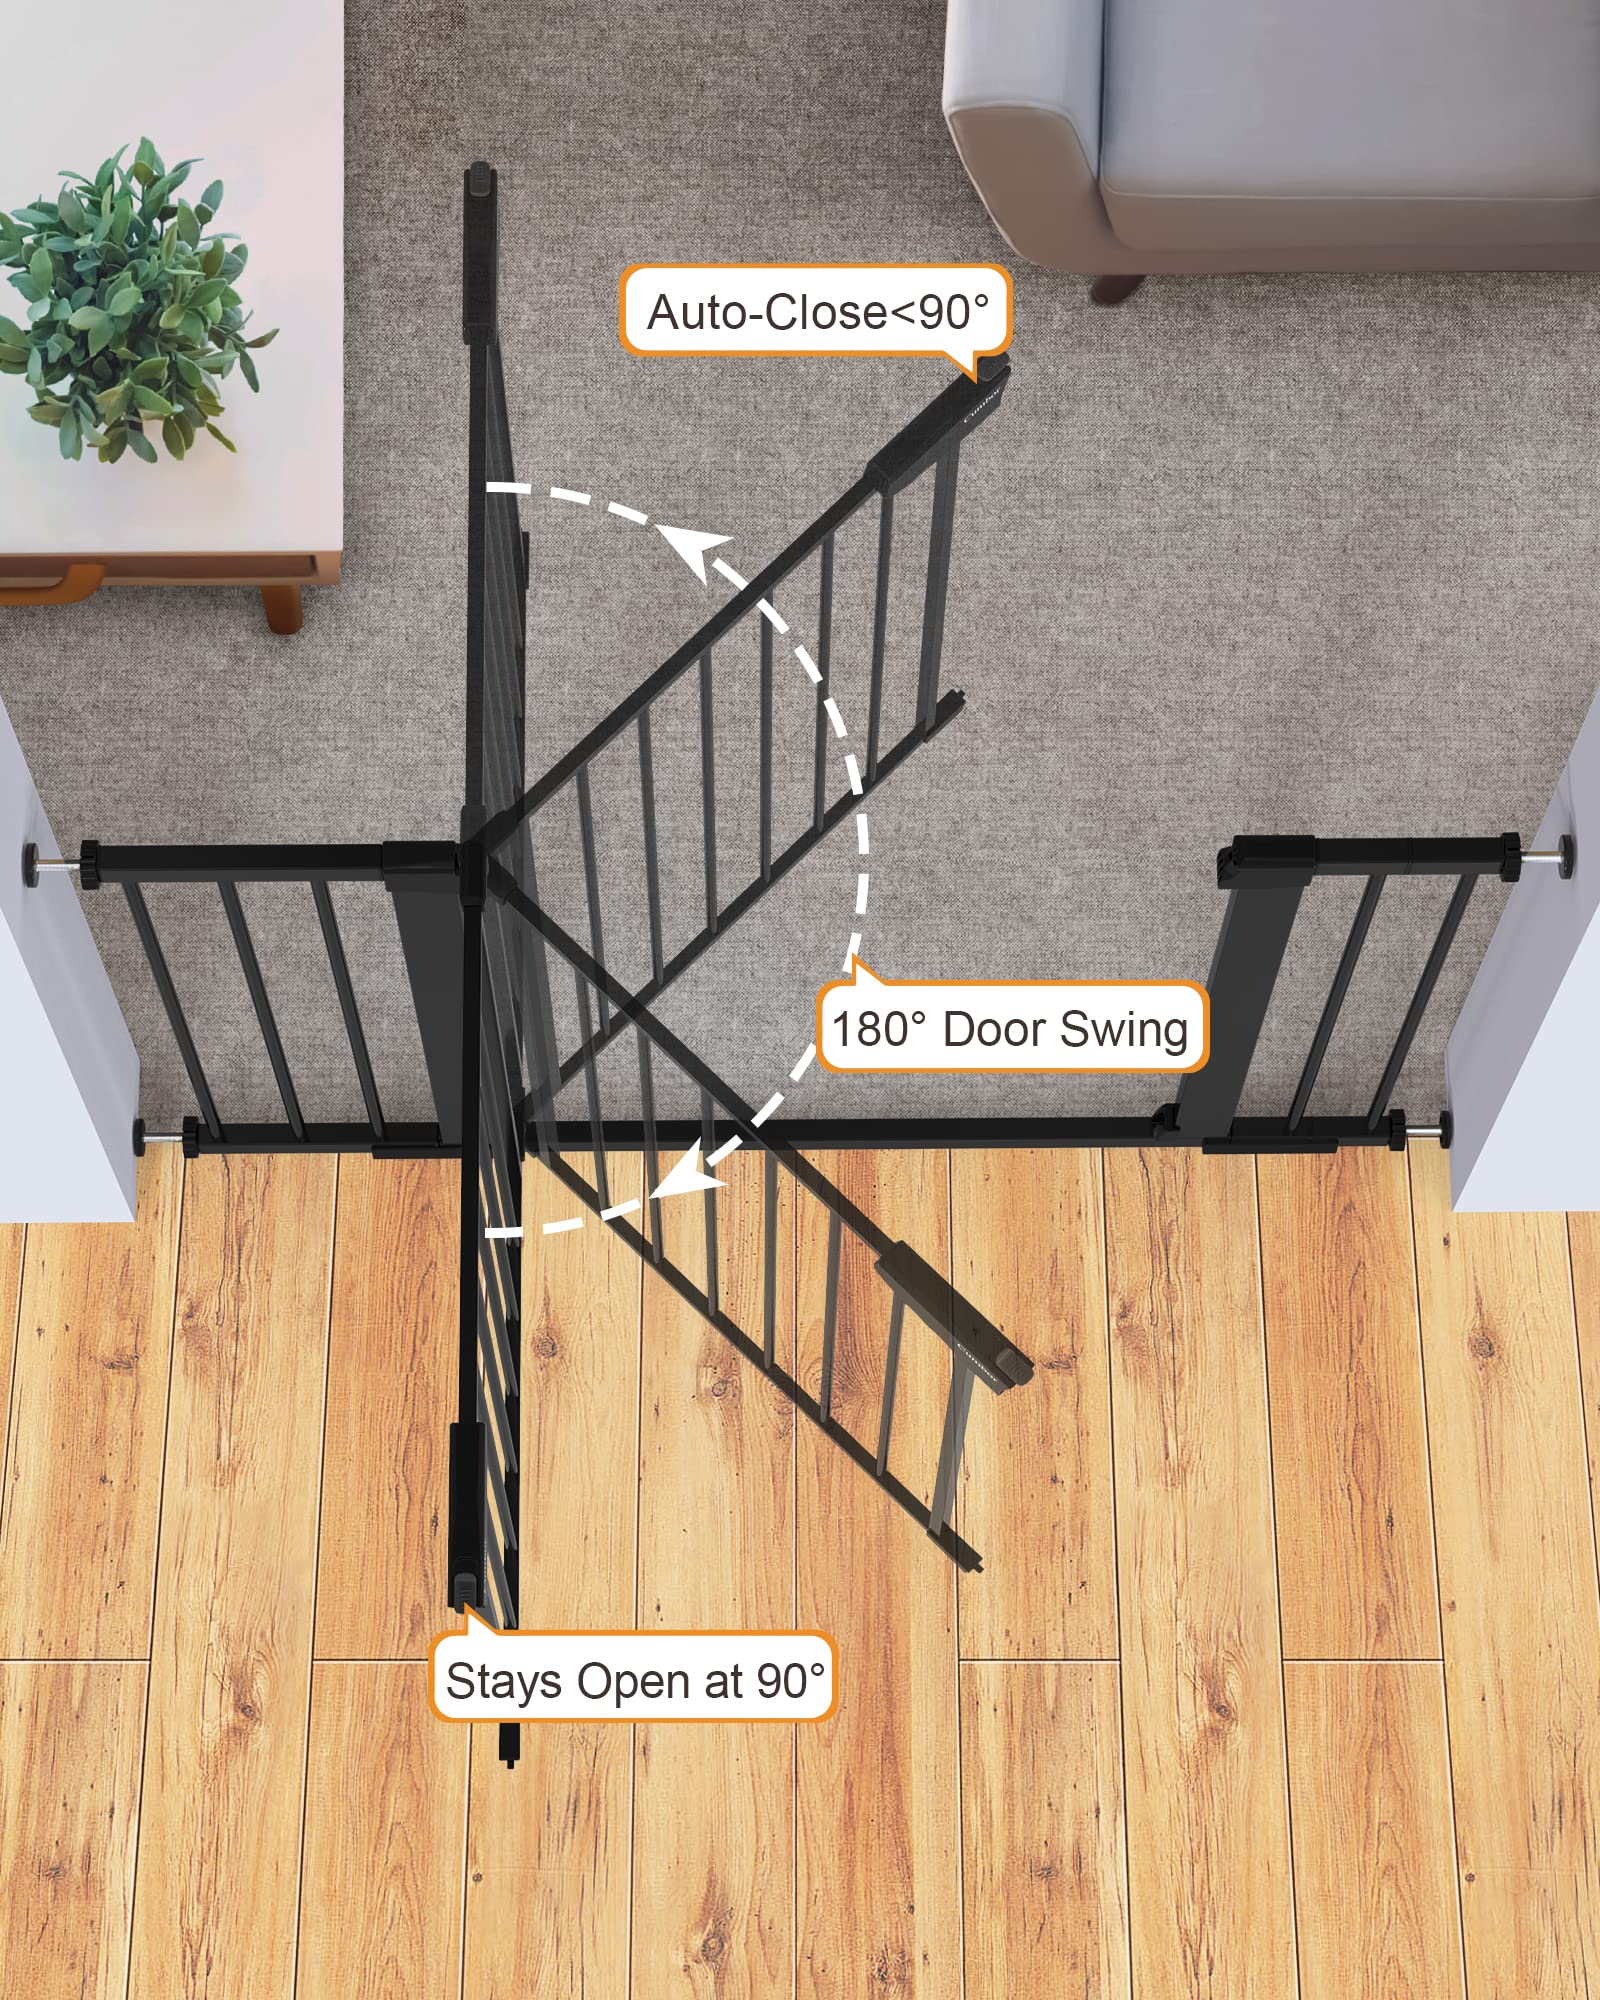 Cumbor 36" Extra Tall Baby Gate for Dogs and Kids with Wide 2-Way Door, 29.7"- 46" Width, and Auto Close Personal Safety for Babies and Pets, Fits Doorways, Stairs, and Entryways, Black